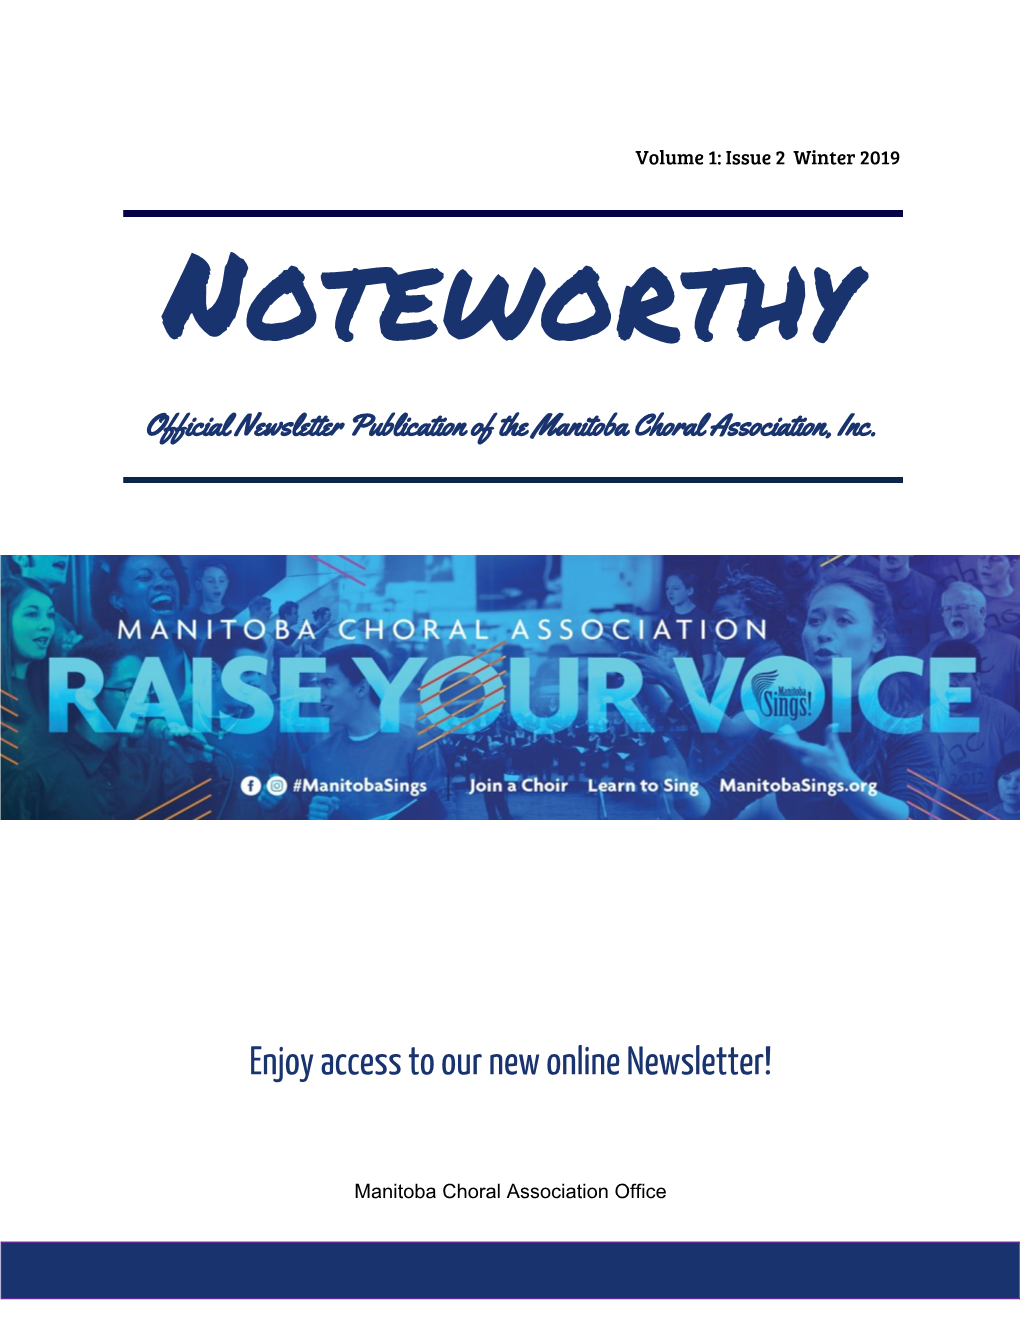 Enjoy Access to Our New Online Newsletter!